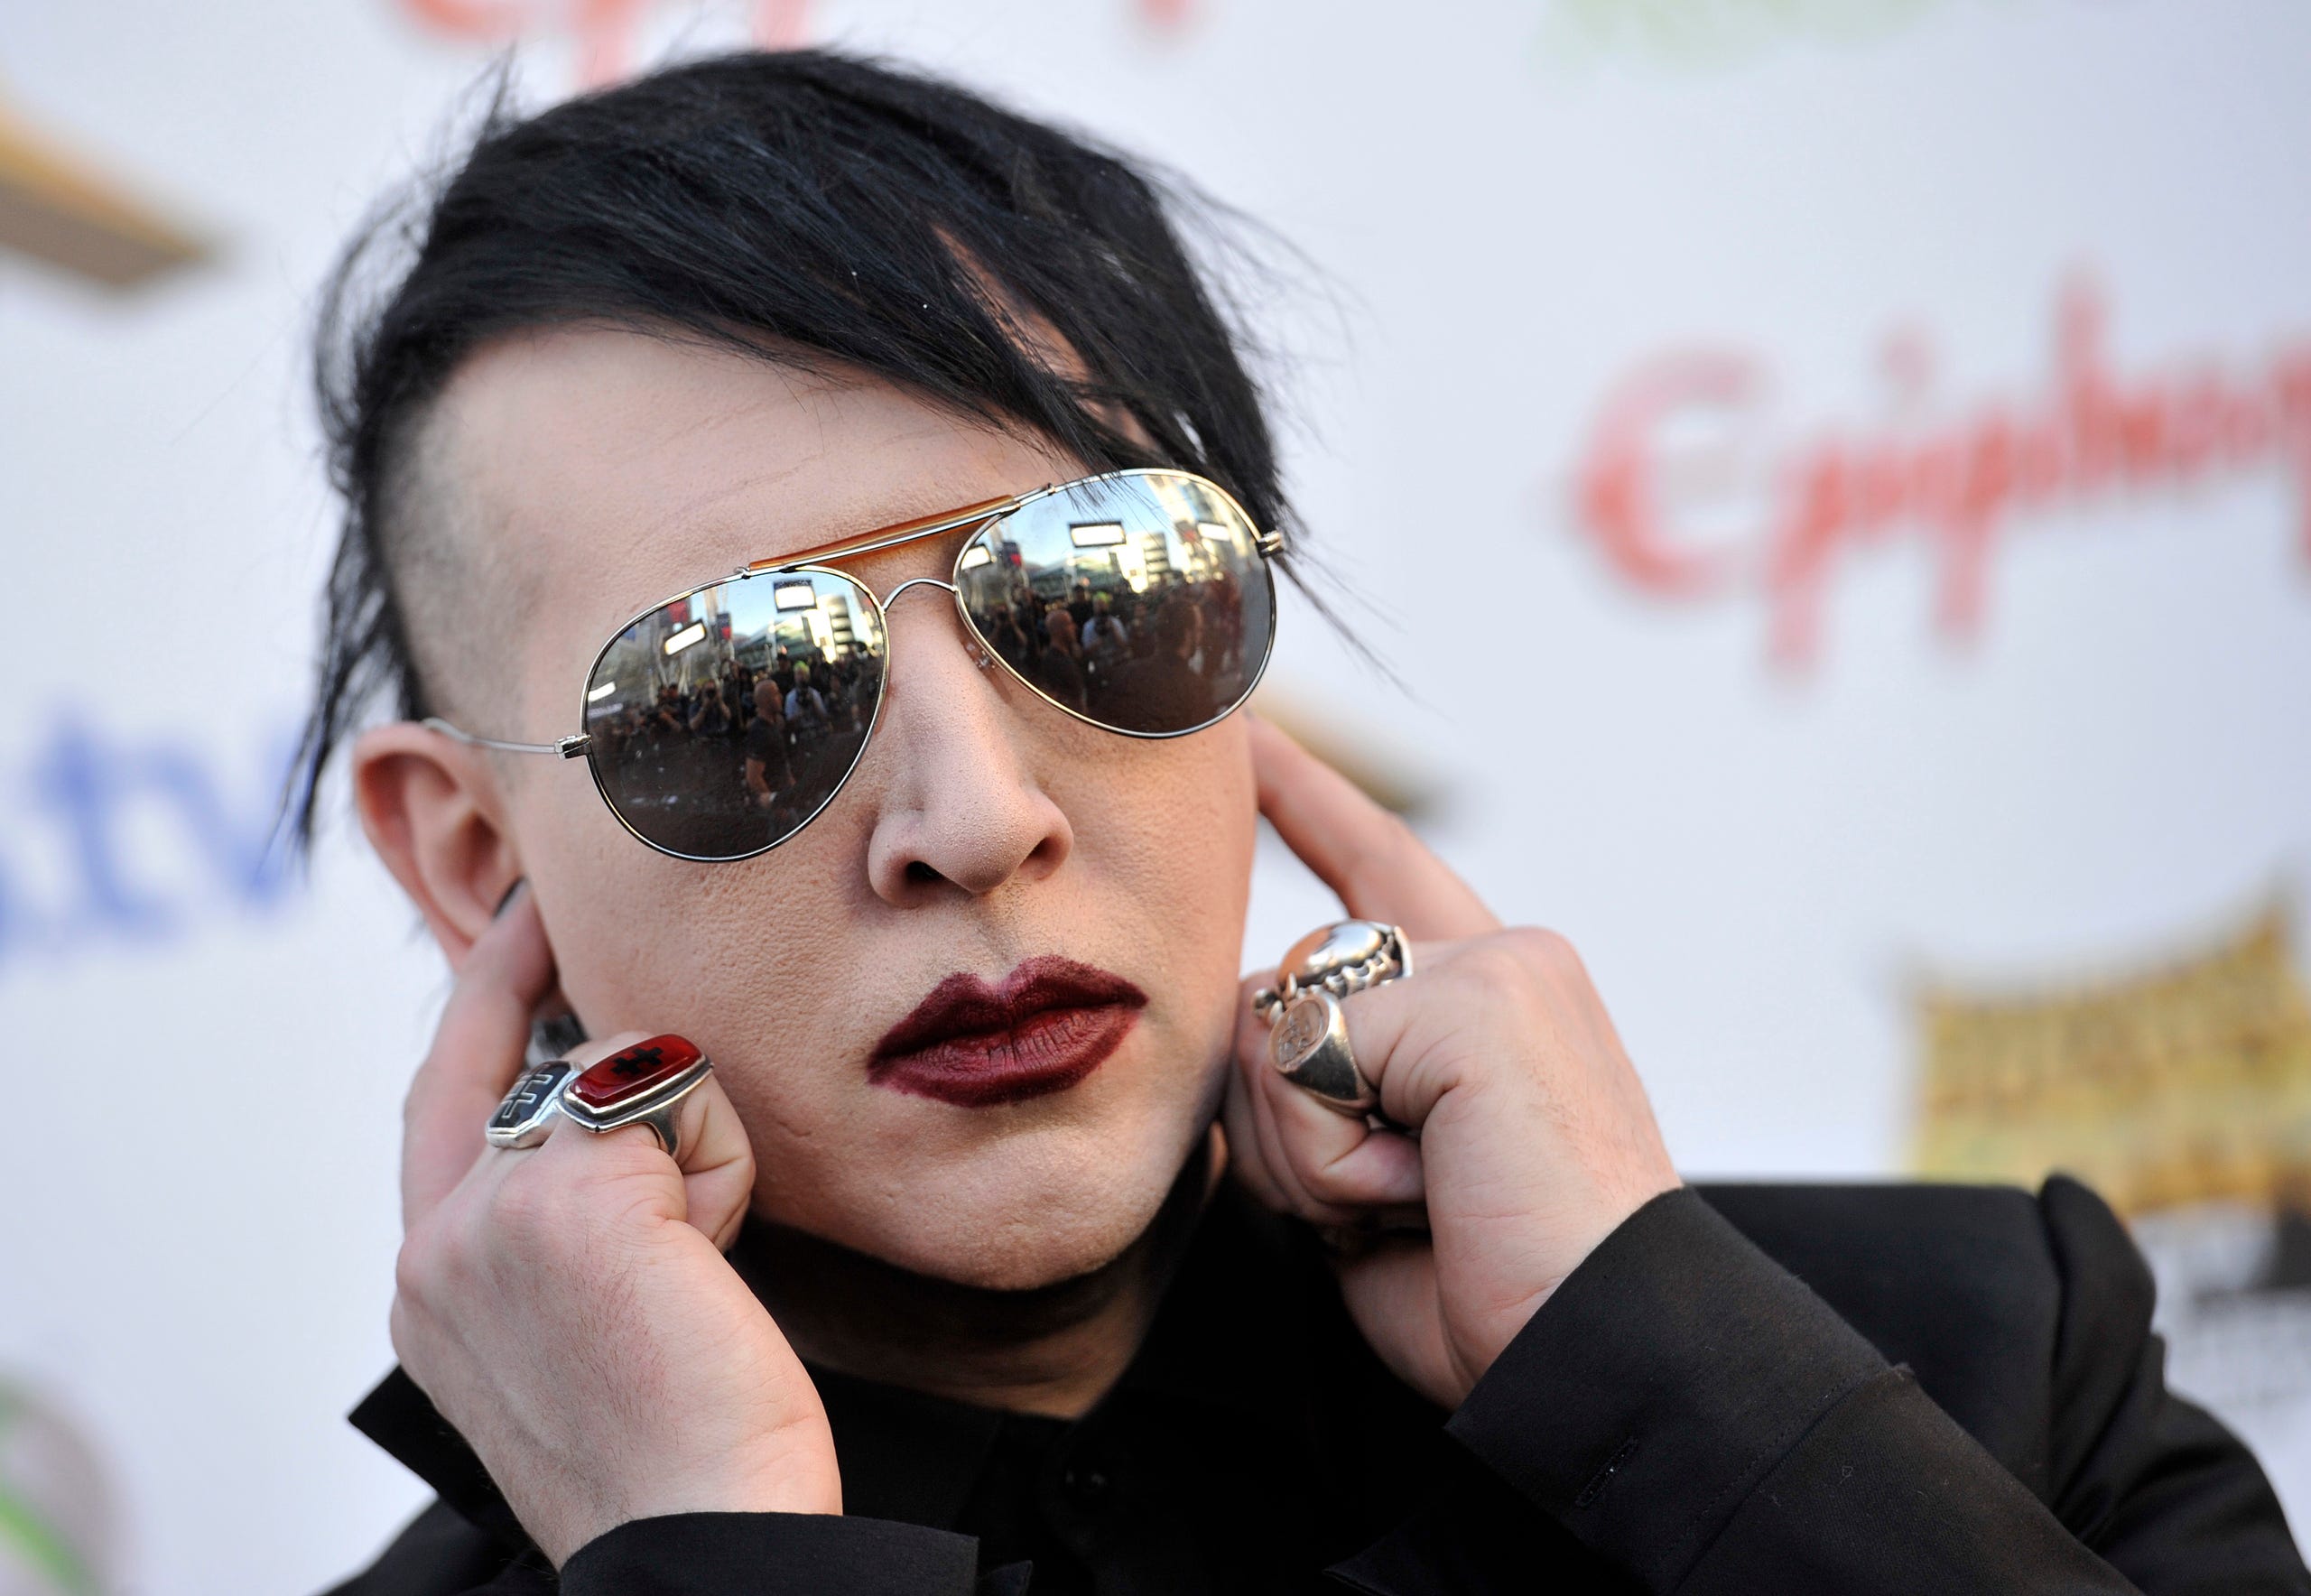 One of rock 'n' roll's most shocking &ndash; not to mention cautionary&nbsp;&ndash; tales come from Marilyn Manson, who claimed in a&nbsp;1995 interview with High Times that he ground up human bones and smoked them.&nbsp;&quot;It was terrible,&quot; he said. &quot;It smelled like burnt hair, gave you a really bad headache and made your eyes red.&quot;